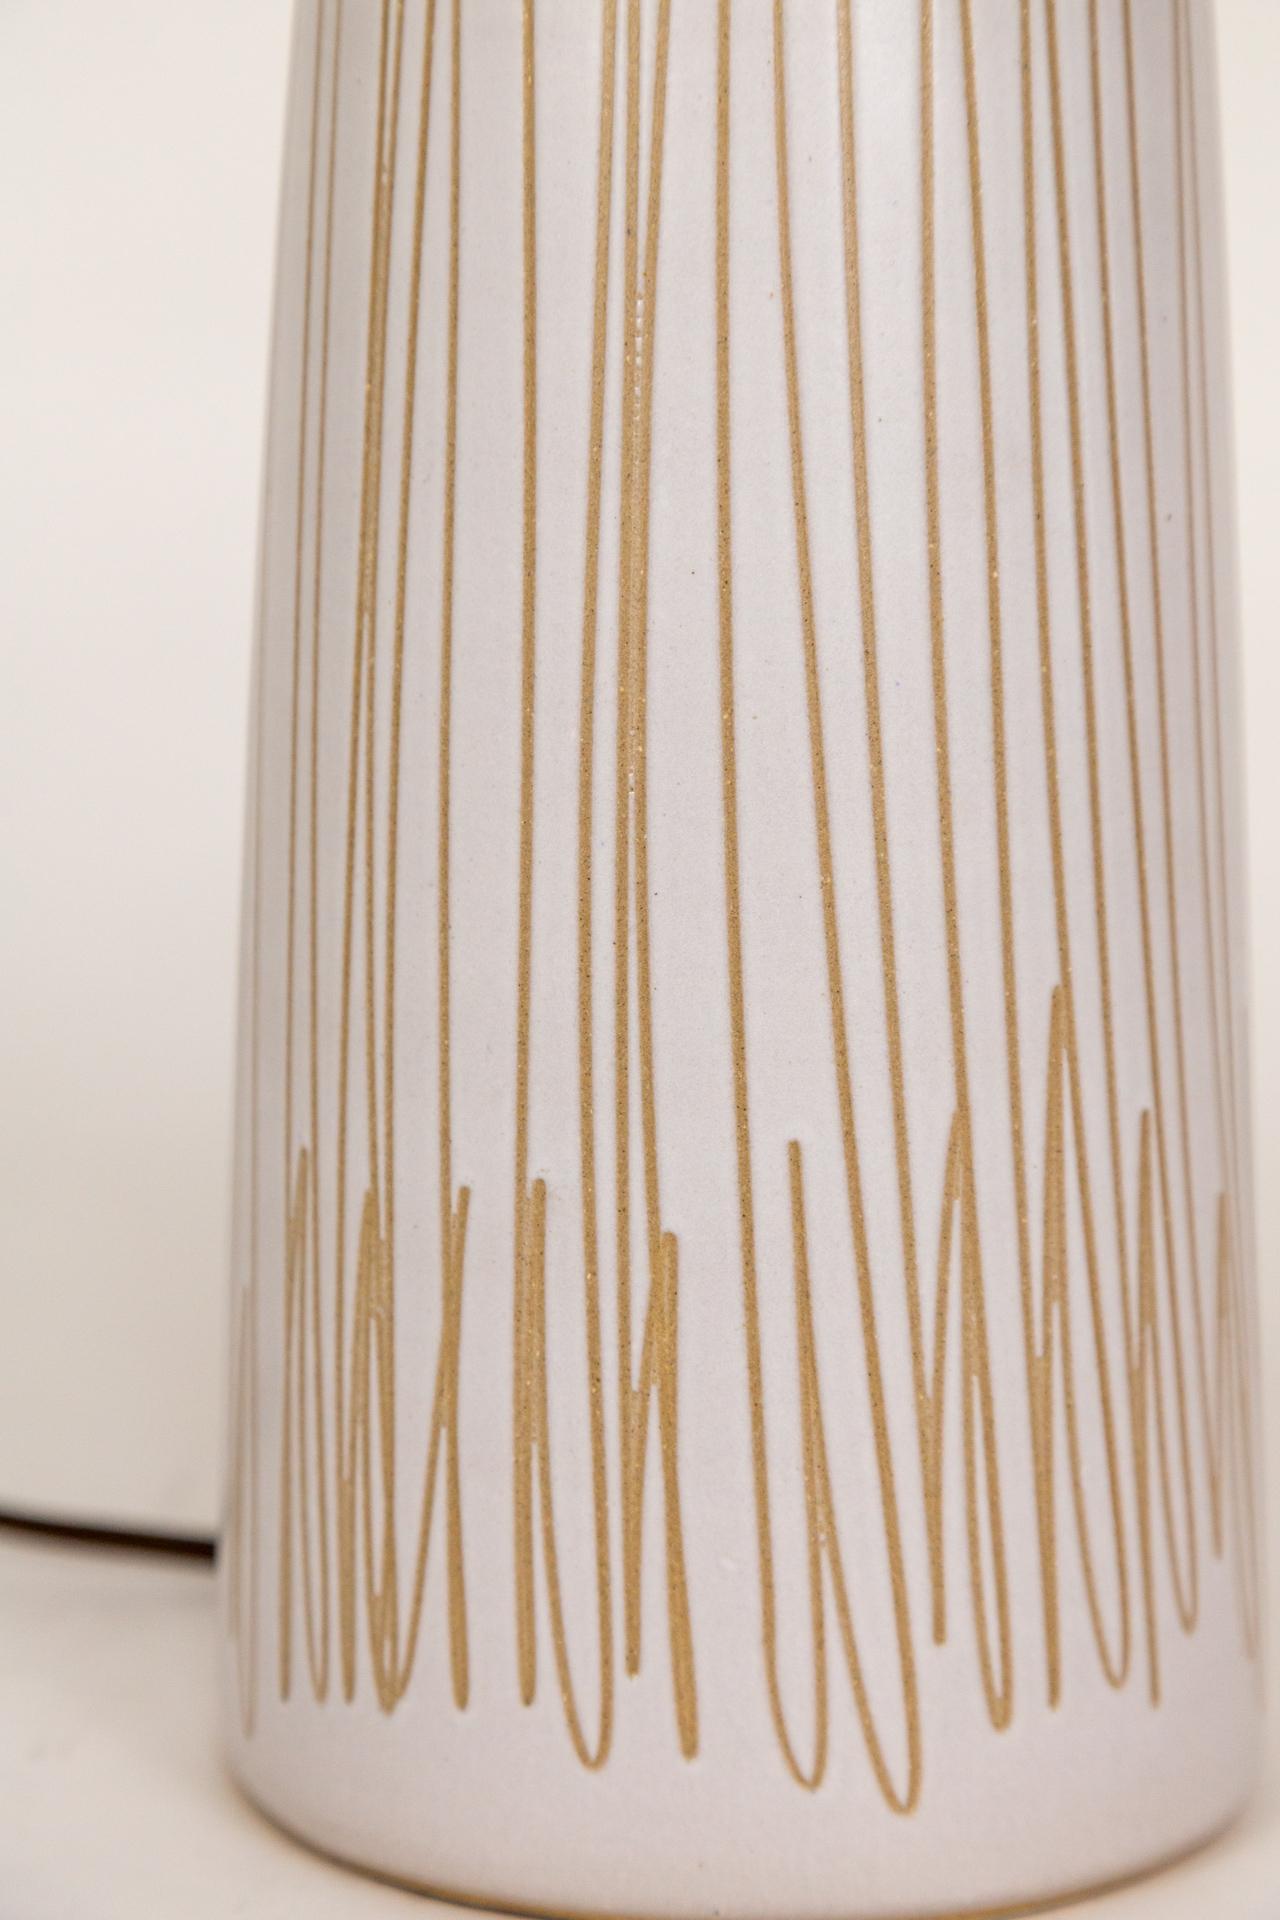 A streamlined, ceramic lamp in white satin glaze with scribbles revealing the raw clay; made by Marshall Studios and designed by Jane and Gordon Martz, circa the 1960s.  It is cylindrical shape with a cherry stained wood neck. Signed on the back. 